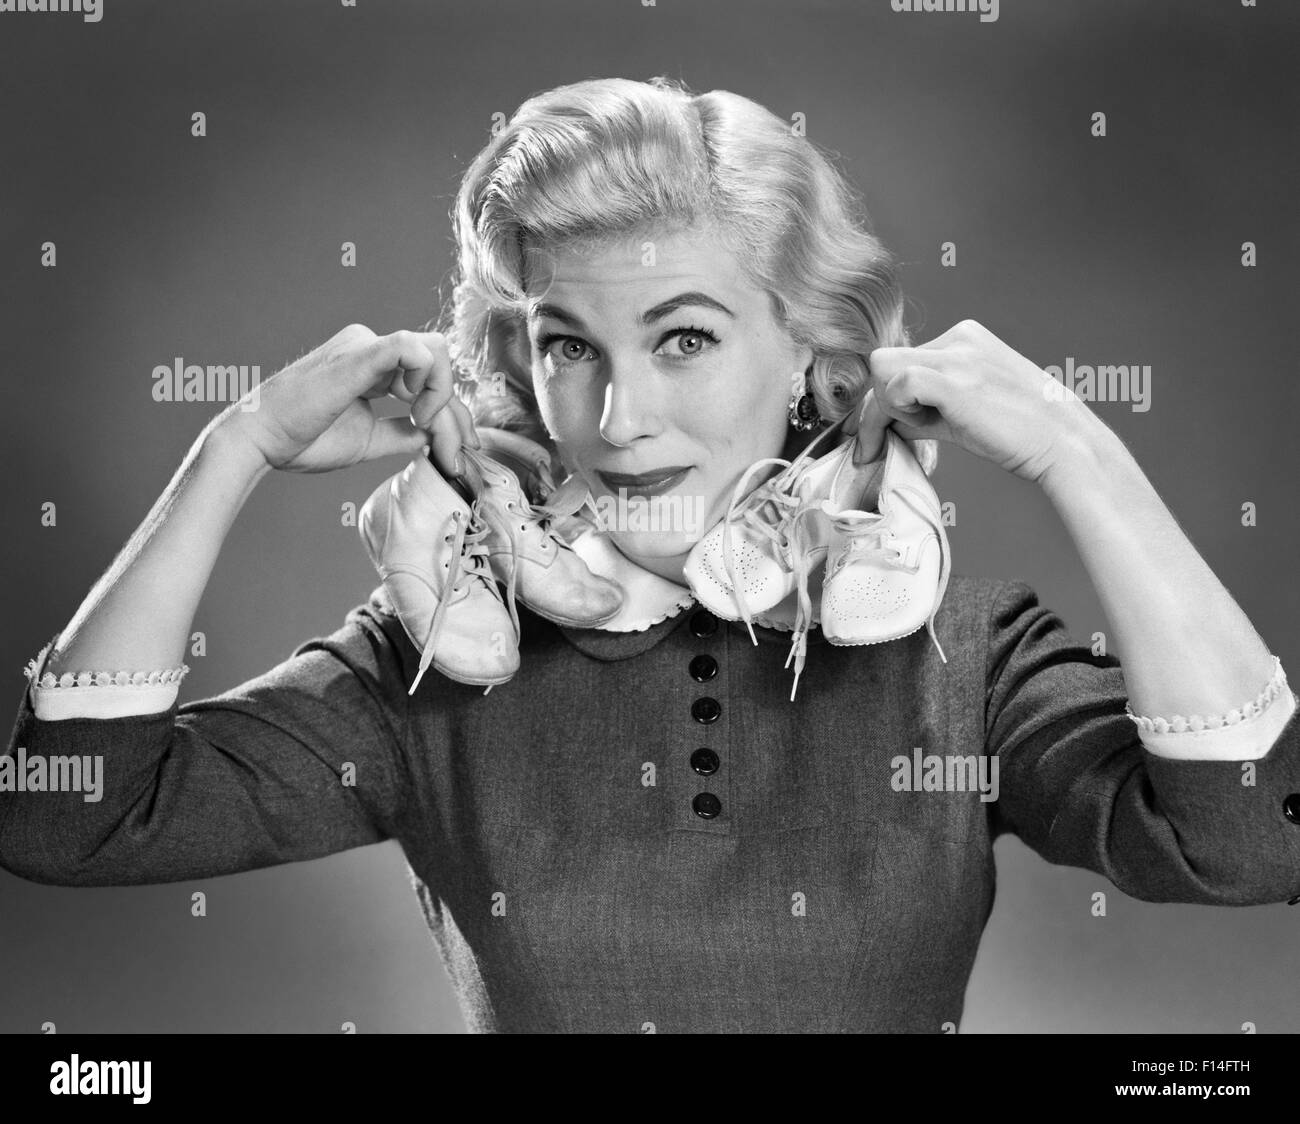 1950s PORTRAIT BLOND WOMAN HOLDING UP A PAIR OF BABY BOOTIES IN EACH HAND LOOKING AT CAMERA Stock Photo